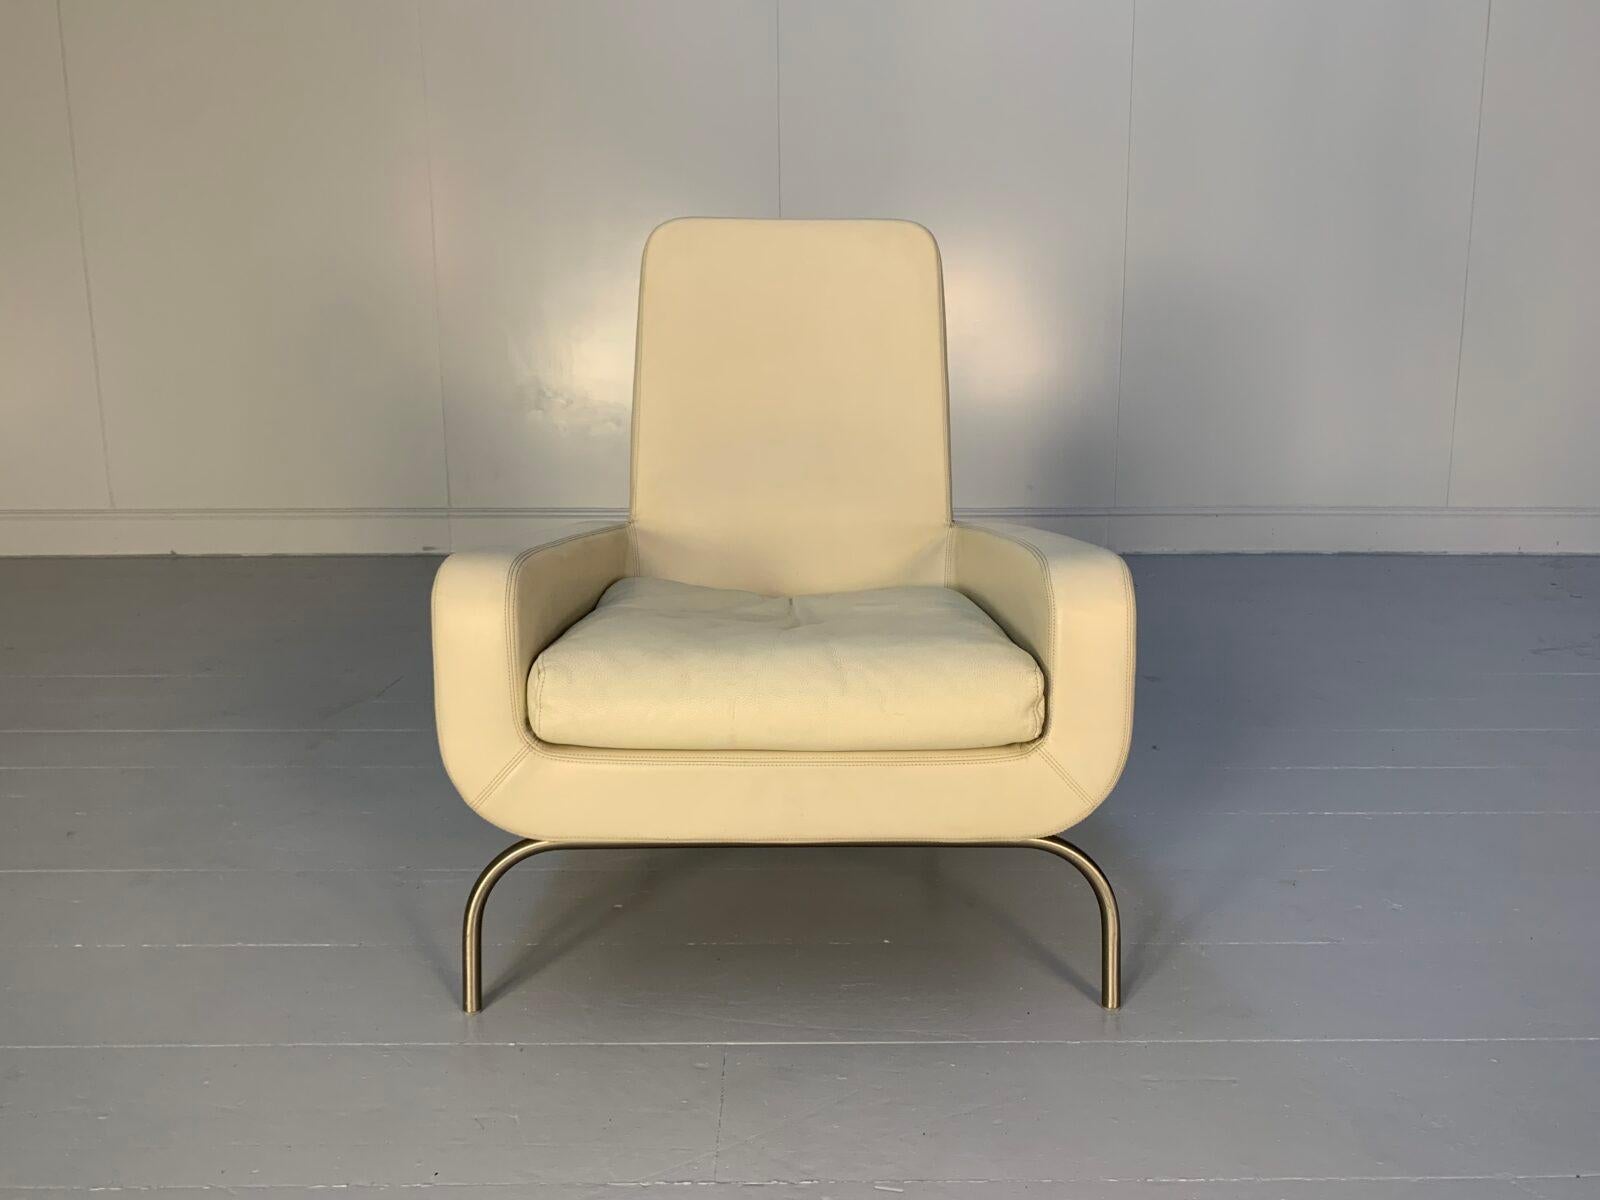 On offer on this occasion is a superb, Minotti “Dubuffet” Armchair, dressed in a peerless, top-grade “Pelle” Leather in Cream, and with Satin-Metal base and legs.

As you will no doubt be aware by your interest in this Rodolfo Dordoni masterpiece,